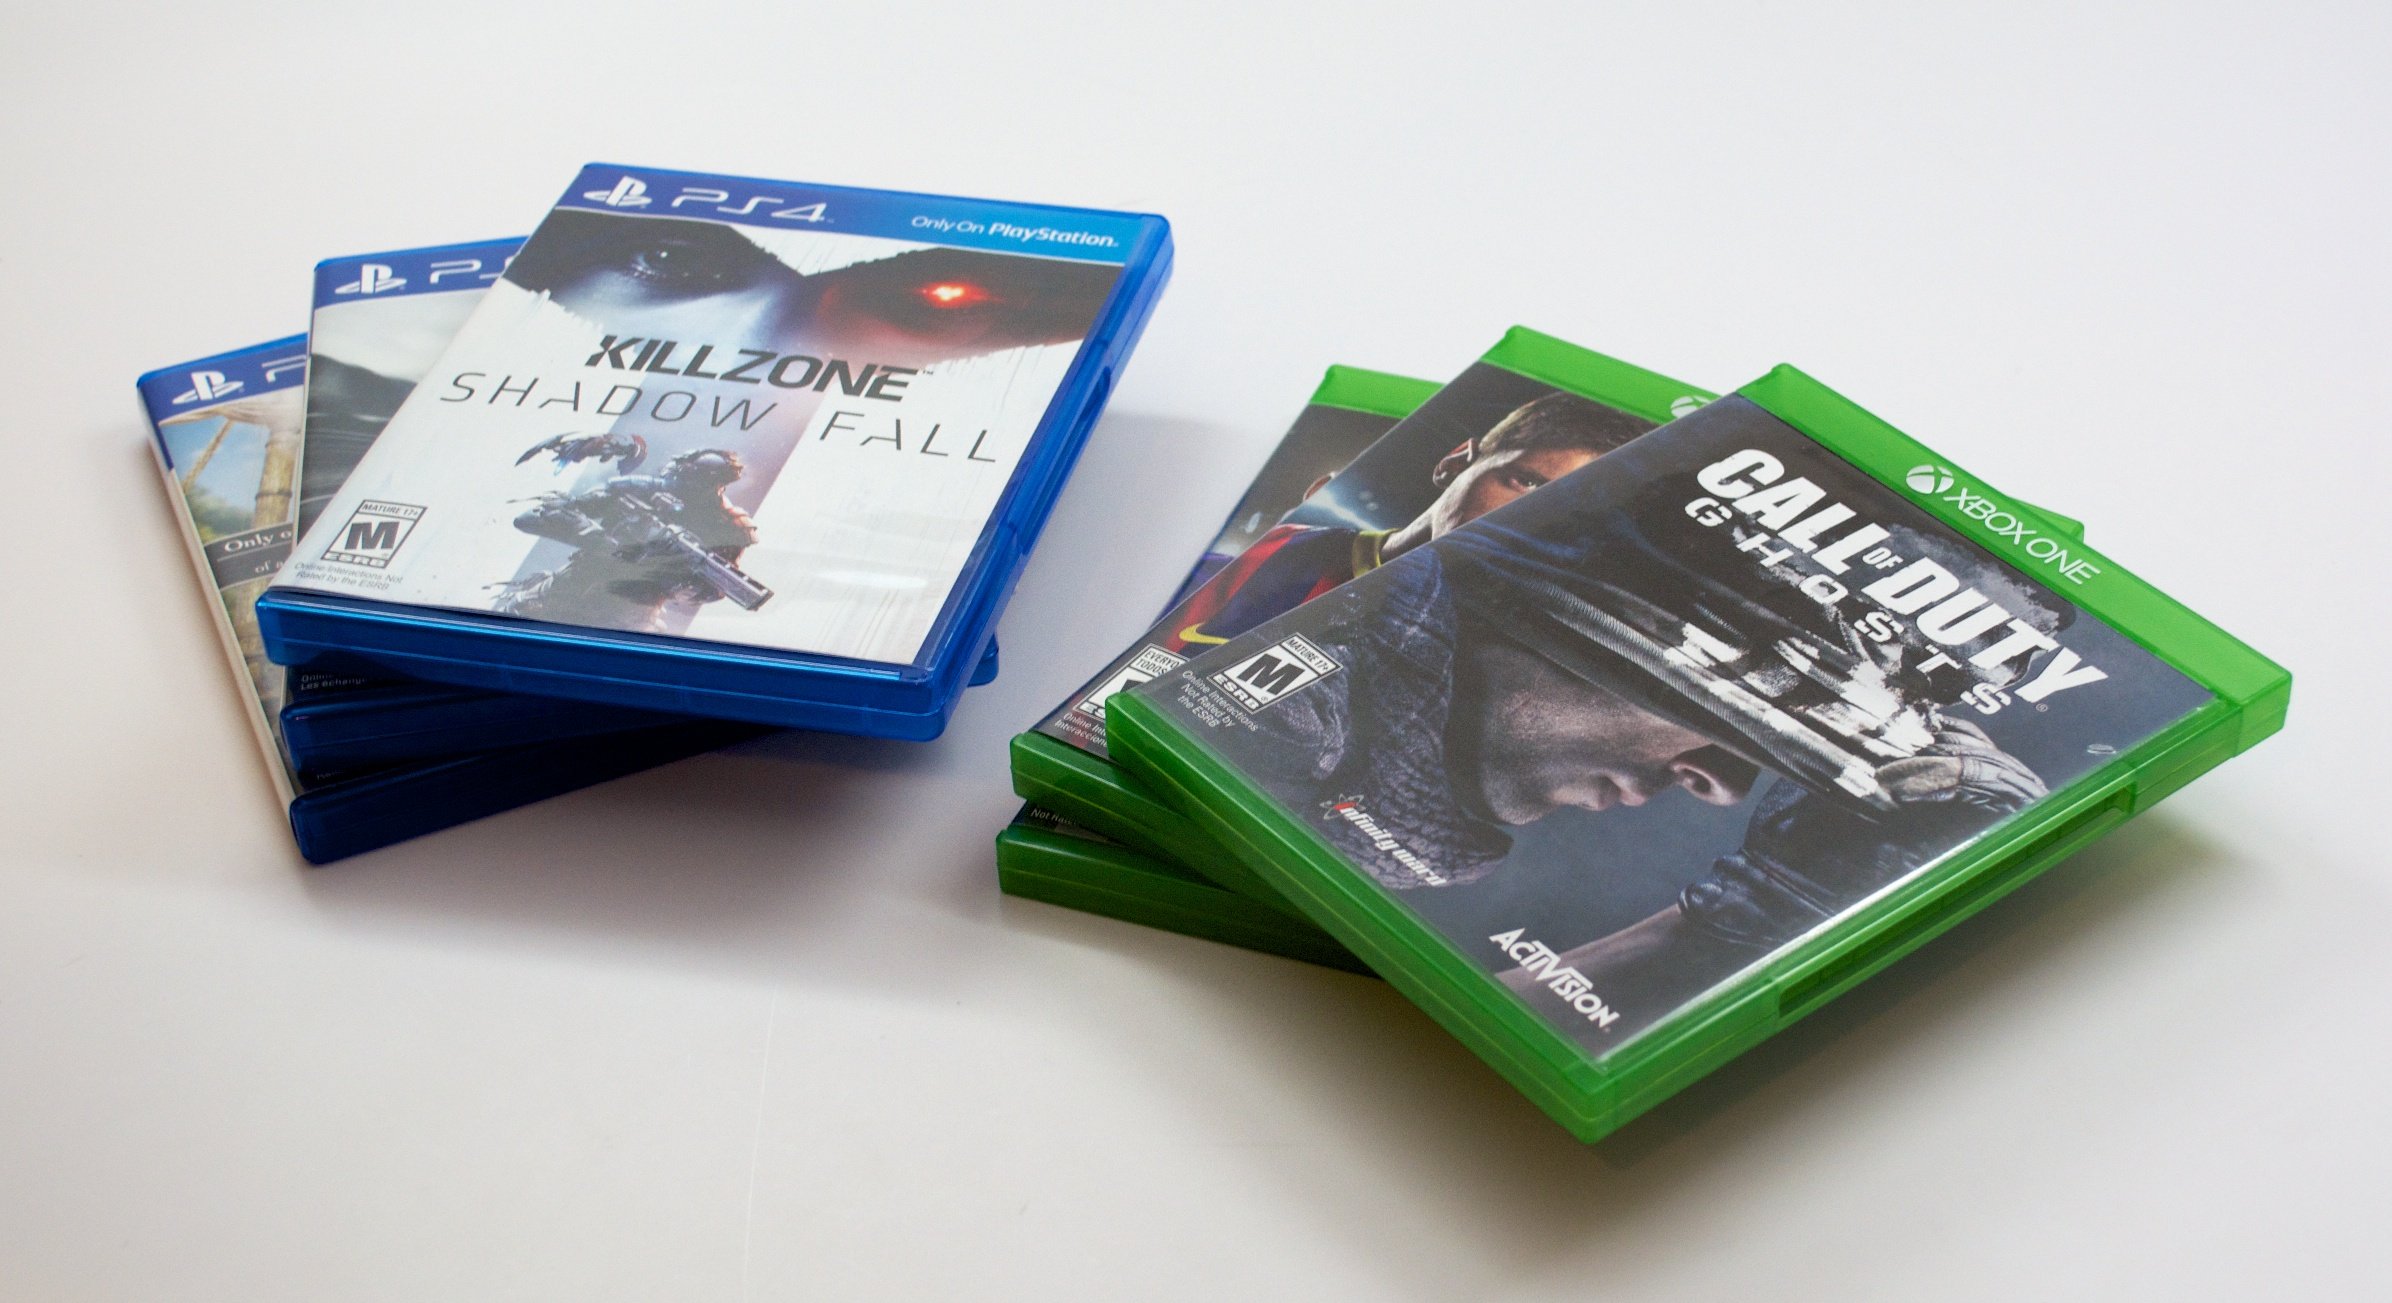 There are many games available on both the PS4 and Xbox One.